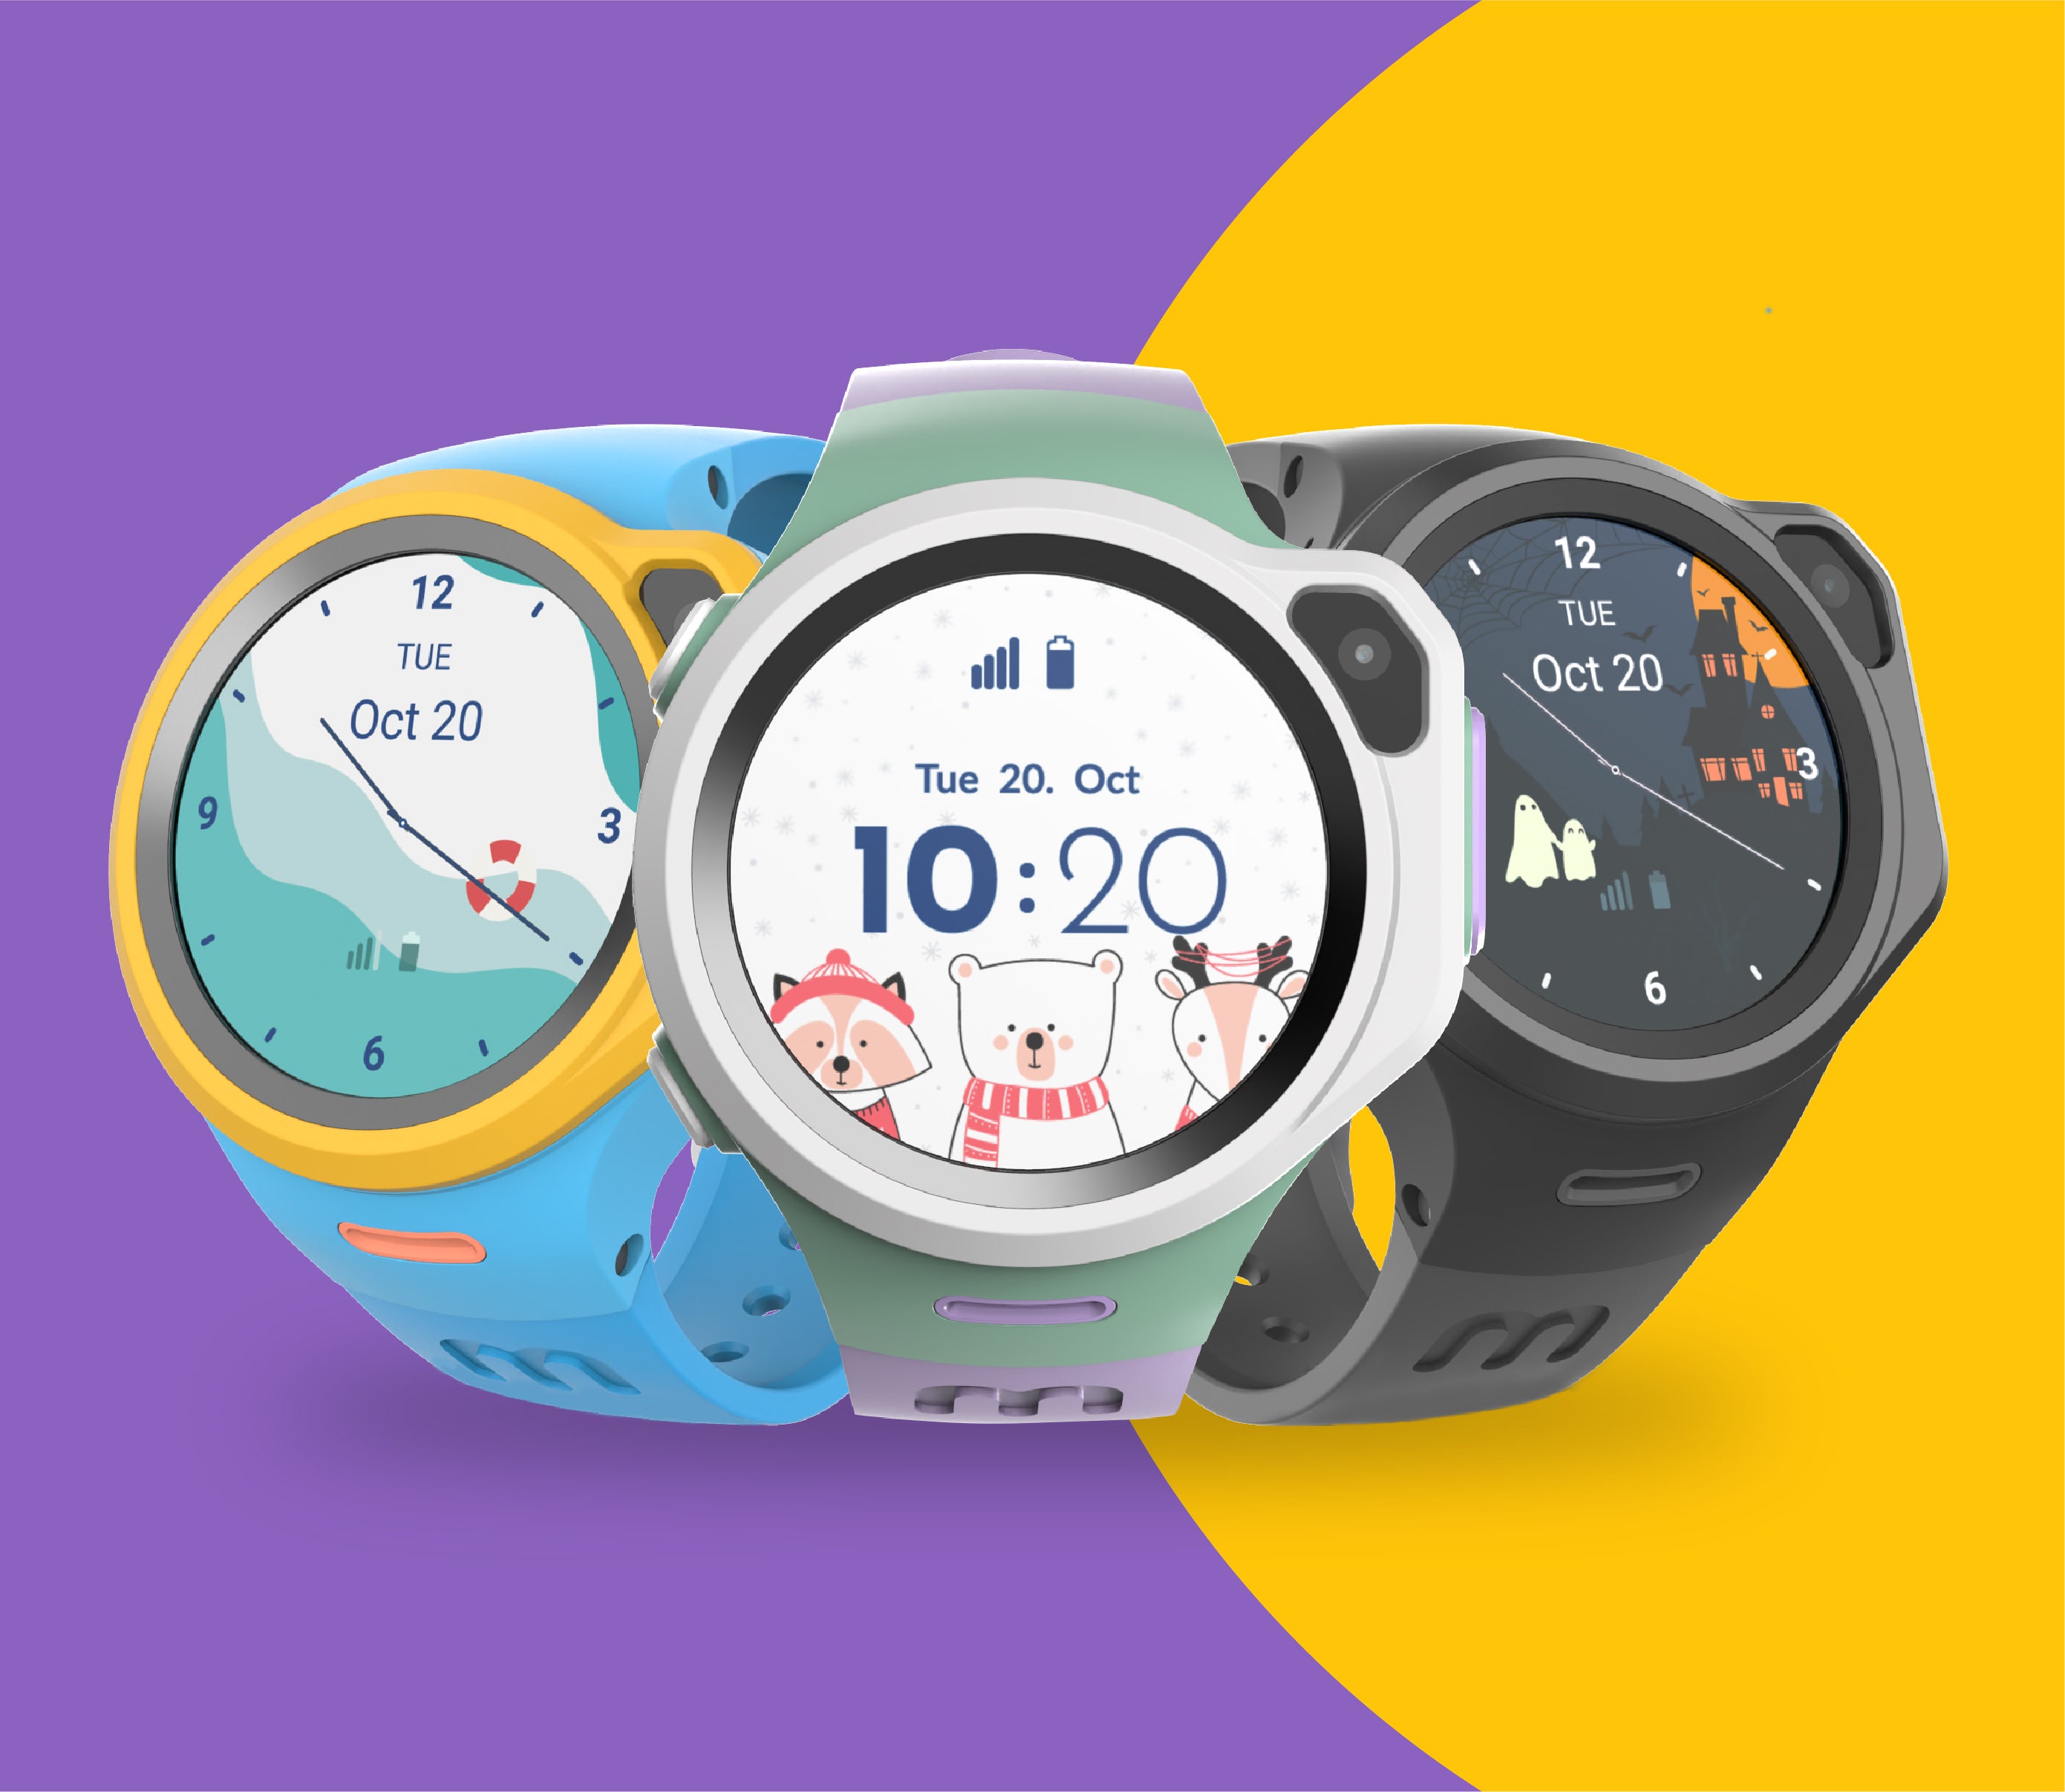 myFirst Fone R1 @ $199 - Smartwatch Designed For Kids (Free Shipping)